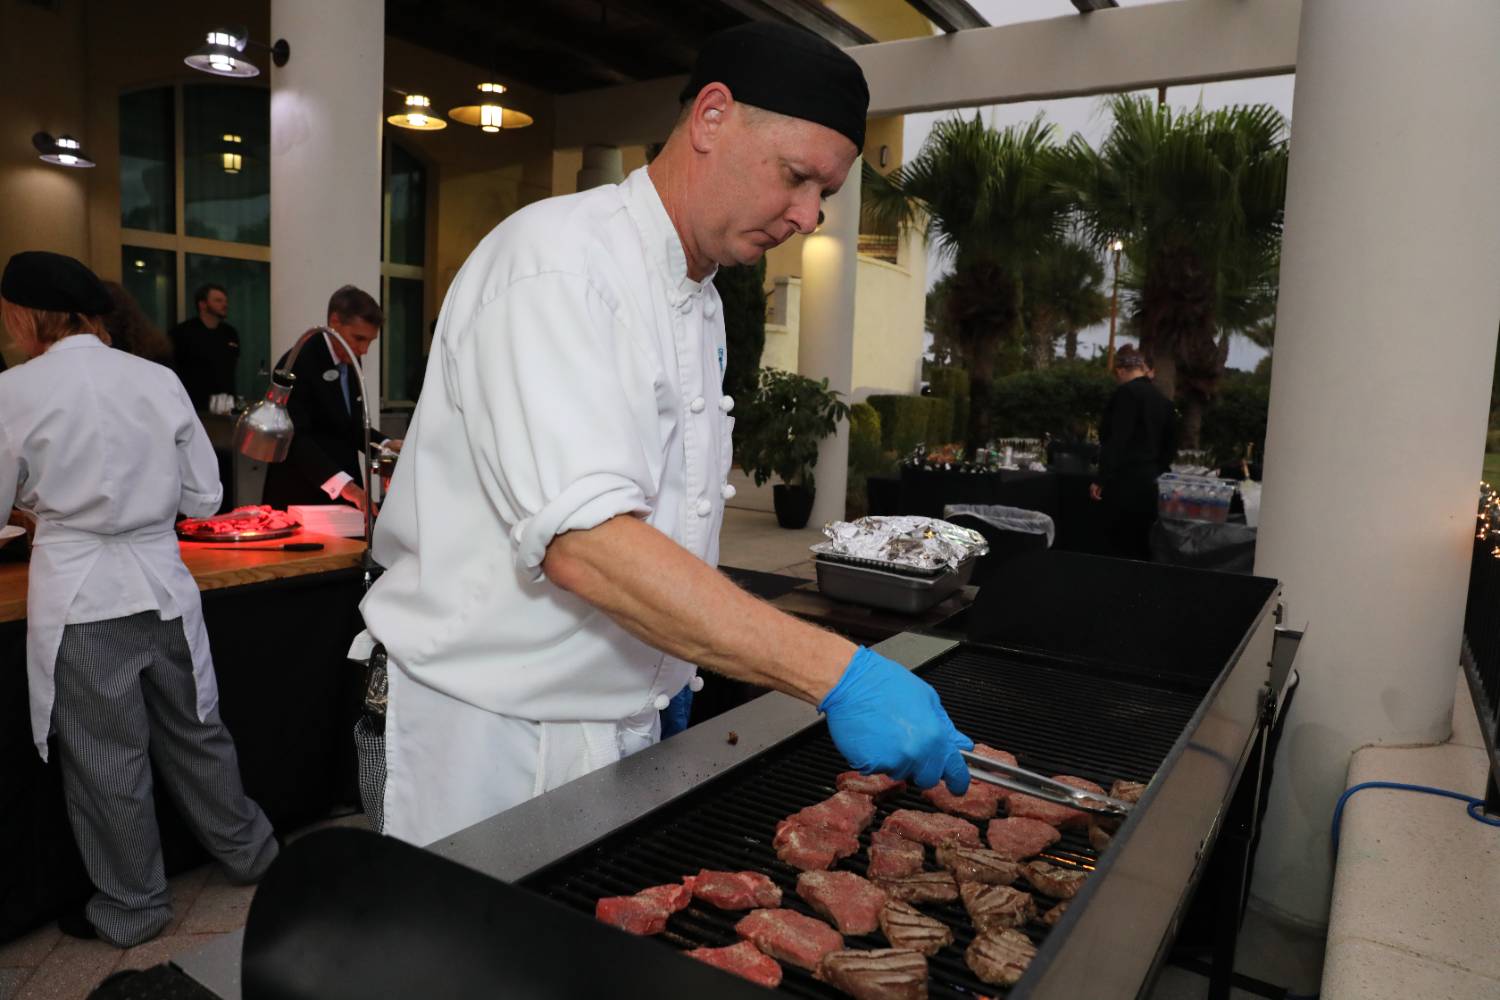 culinary student grilling at annual gala